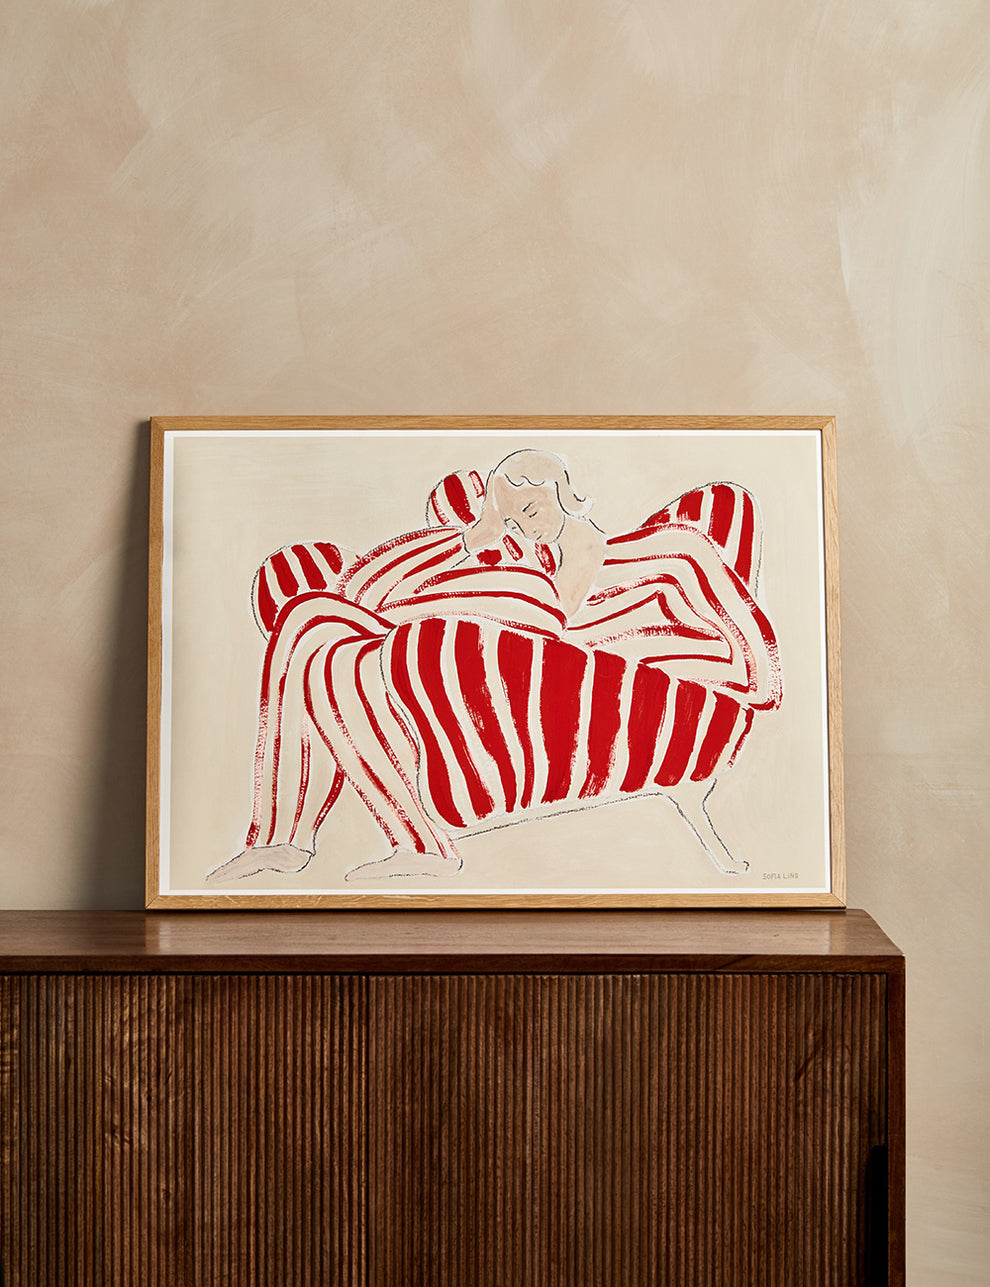 Sofia Lind 'Red Chair' Print
